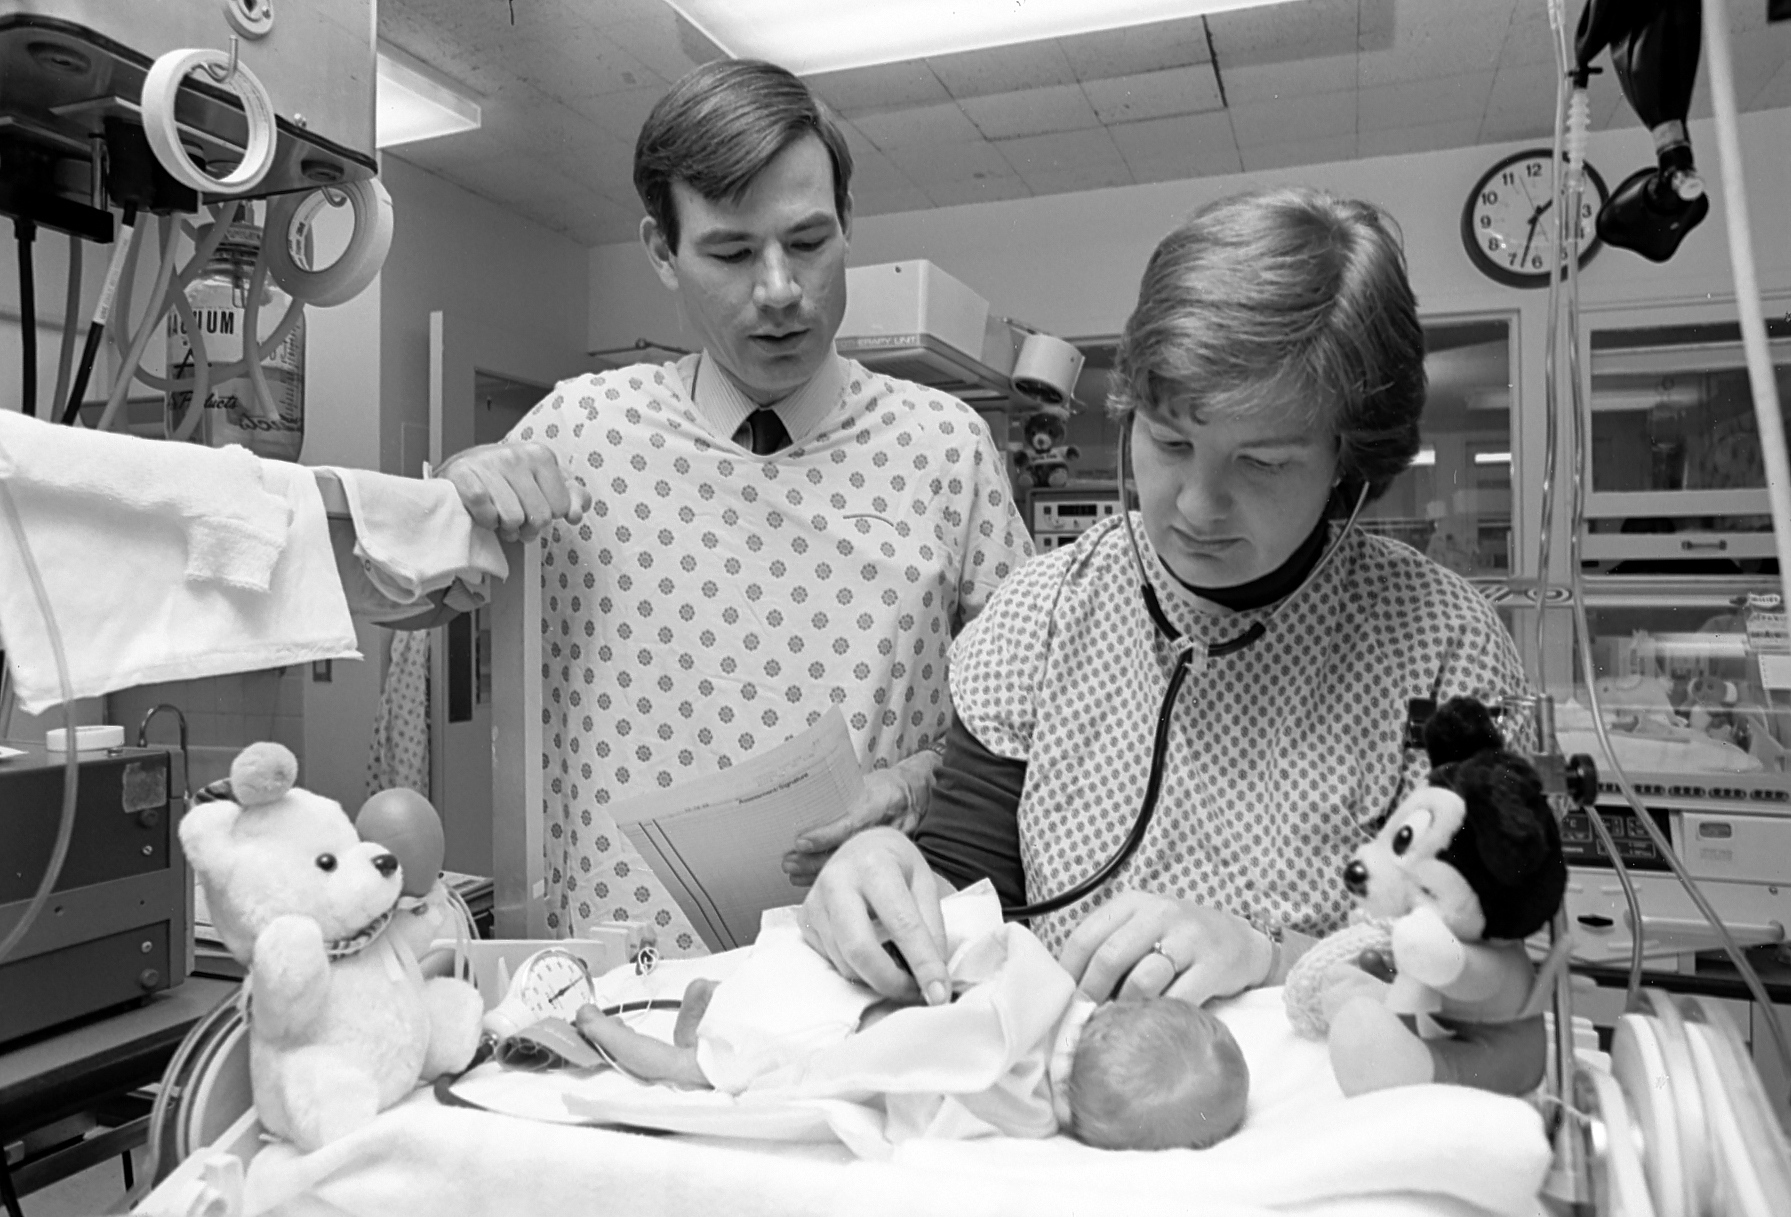 A doctor and nurse examine an infant in the neonatal intensive care unit